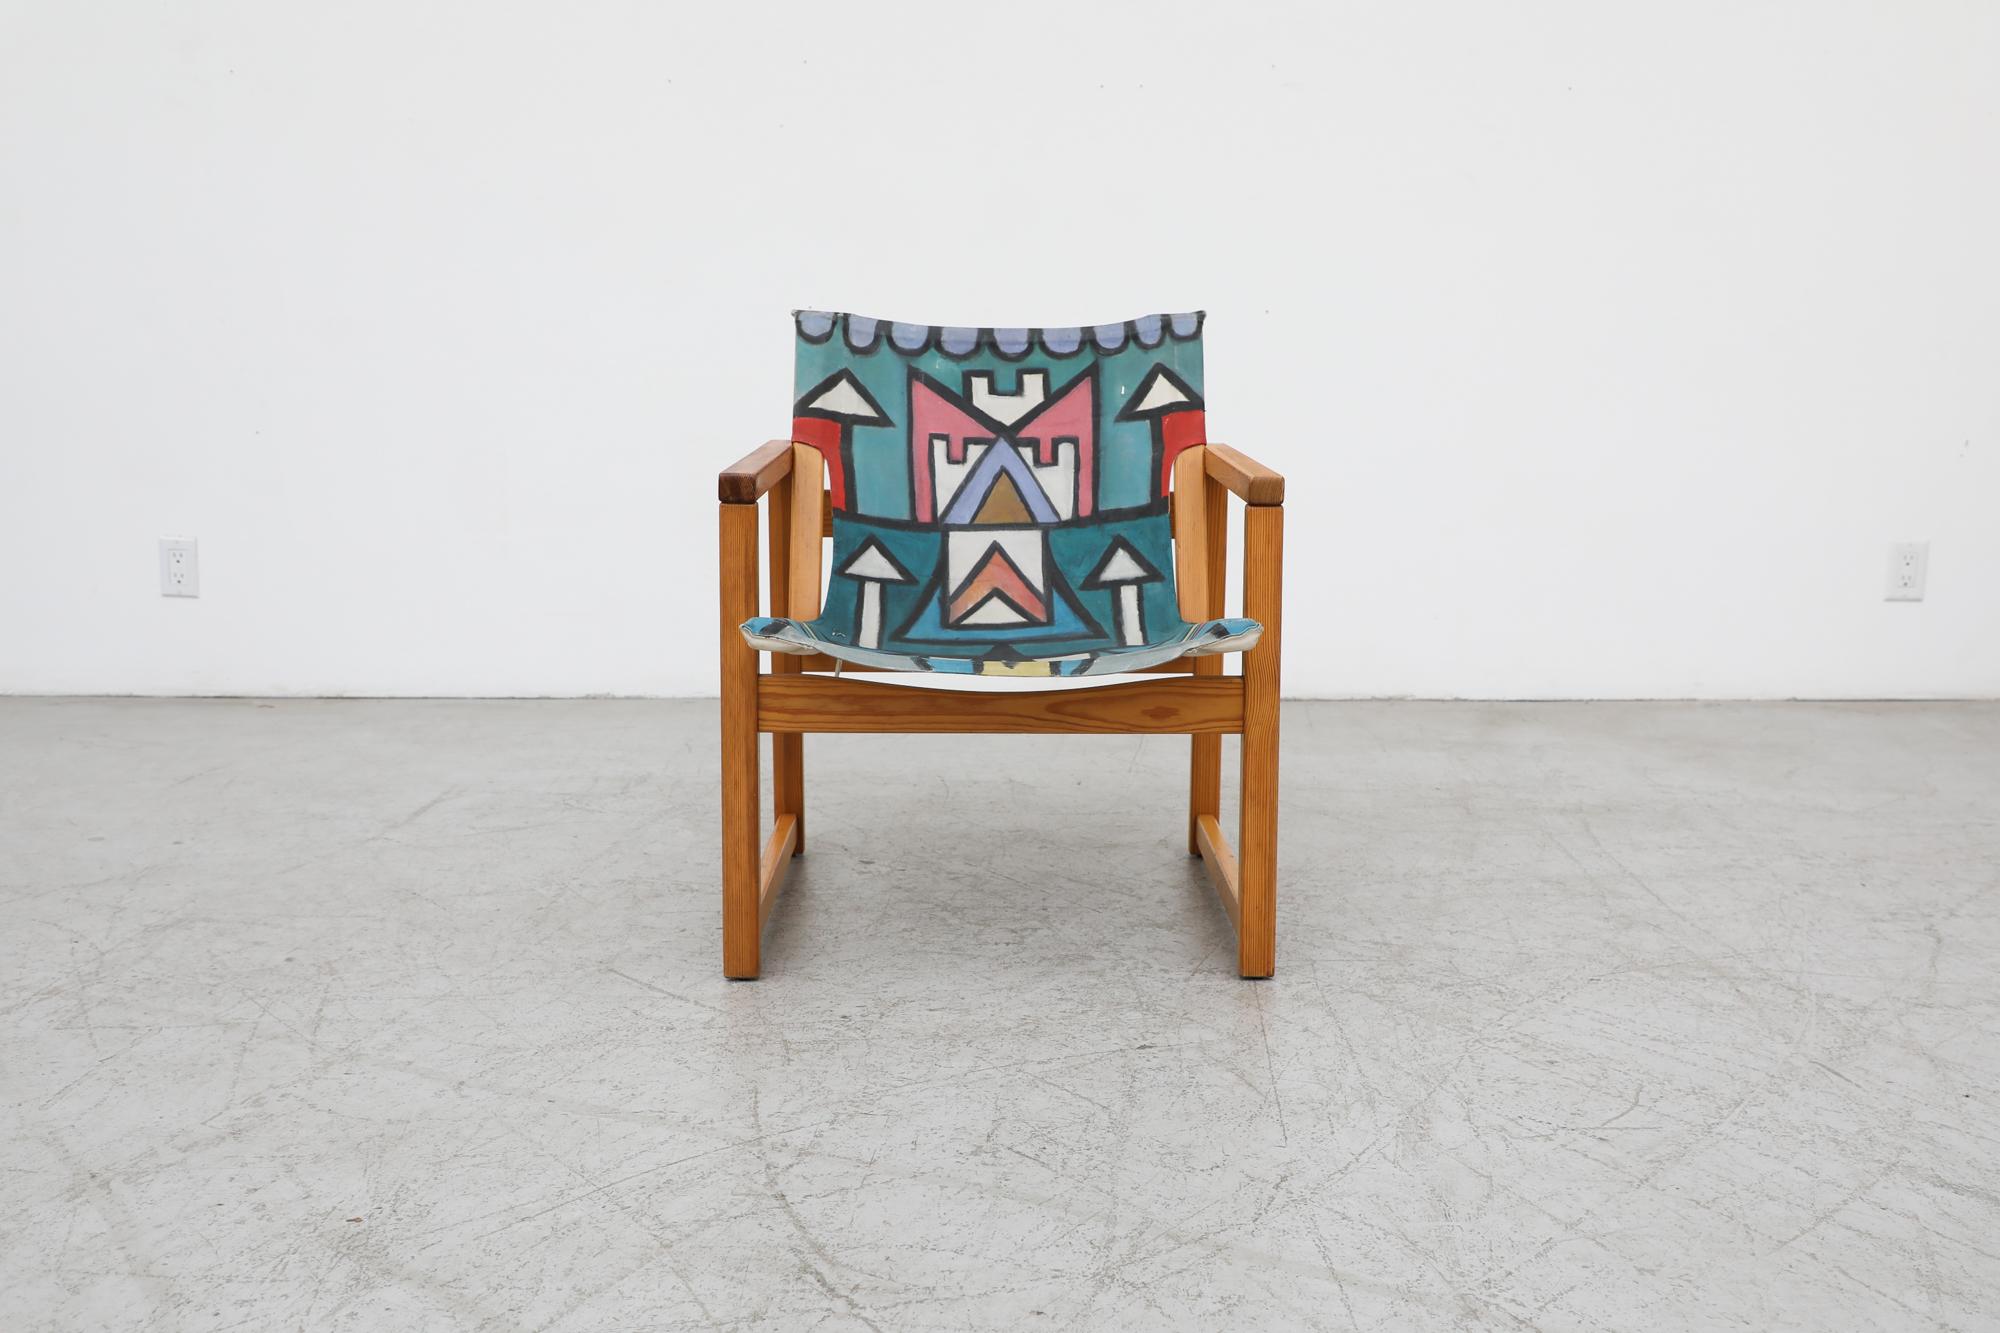 This pine Safari chair with canvas seating and leather strapping that was designed by Swedish Mid Century Design pioneer Karin Mobring has been hand painted by an unknown artist. Fun vibrant Memphis inspired design in original condition with visible